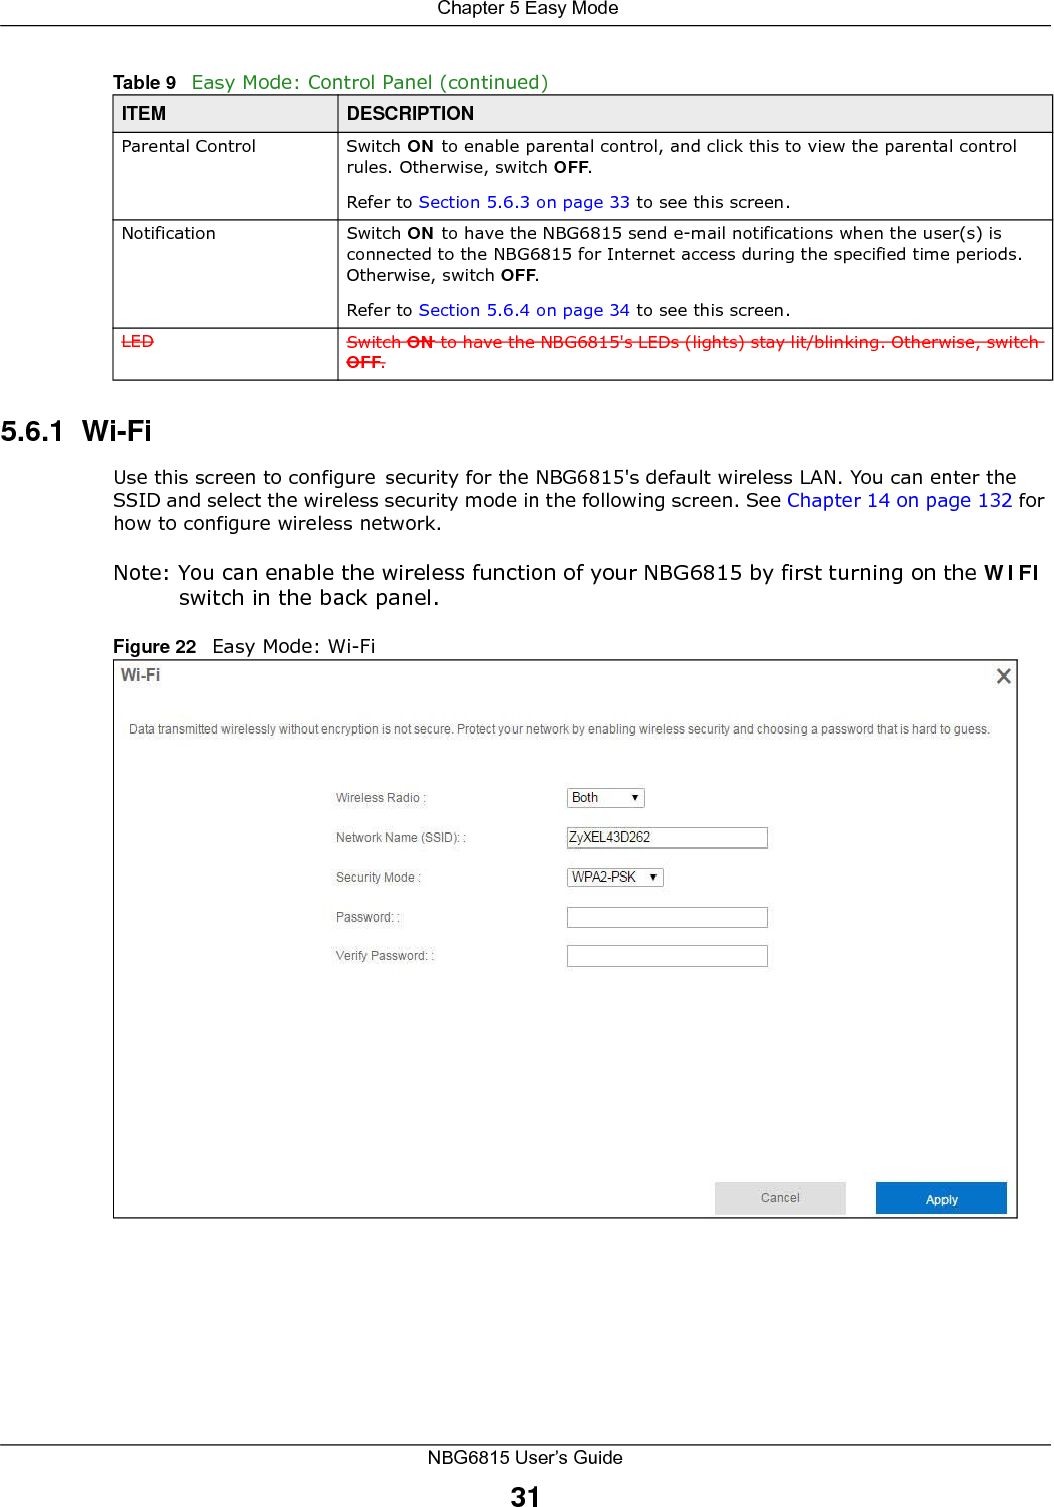  Chapter 5 Easy ModeNBG6815 User’s Guide315.6.1  Wi-FiUse this screen to configure security for the NBG6815&apos;s default wireless LAN. You can enter the SSID and select the wireless security mode in the following screen. See Chapter 14 on page 132 for how to configure wireless network.Note: You can enable the wireless function of your NBG6815 by first turning on the WIFI switch in the back panel.Figure 22   Easy Mode: Wi-FiParental Control Switch ON to enable parental control, and click this to view the parental control rules. Otherwise, switch OFF.Refer to Section 5.6.3 on page 33 to see this screen.Notification Switch ON to have the NBG6815 send e-mail notifications when the user(s) is connected to the NBG6815 for Internet access during the specified time periods. Otherwise, switch OFF.Refer to Section 5.6.4 on page 34 to see this screen.LED Switch ON to have the NBG6815&apos;s LEDs (lights) stay lit/blinking. Otherwise, switch OFF.Table 9   Easy Mode: Control Panel (continued)ITEM DESCRIPTION